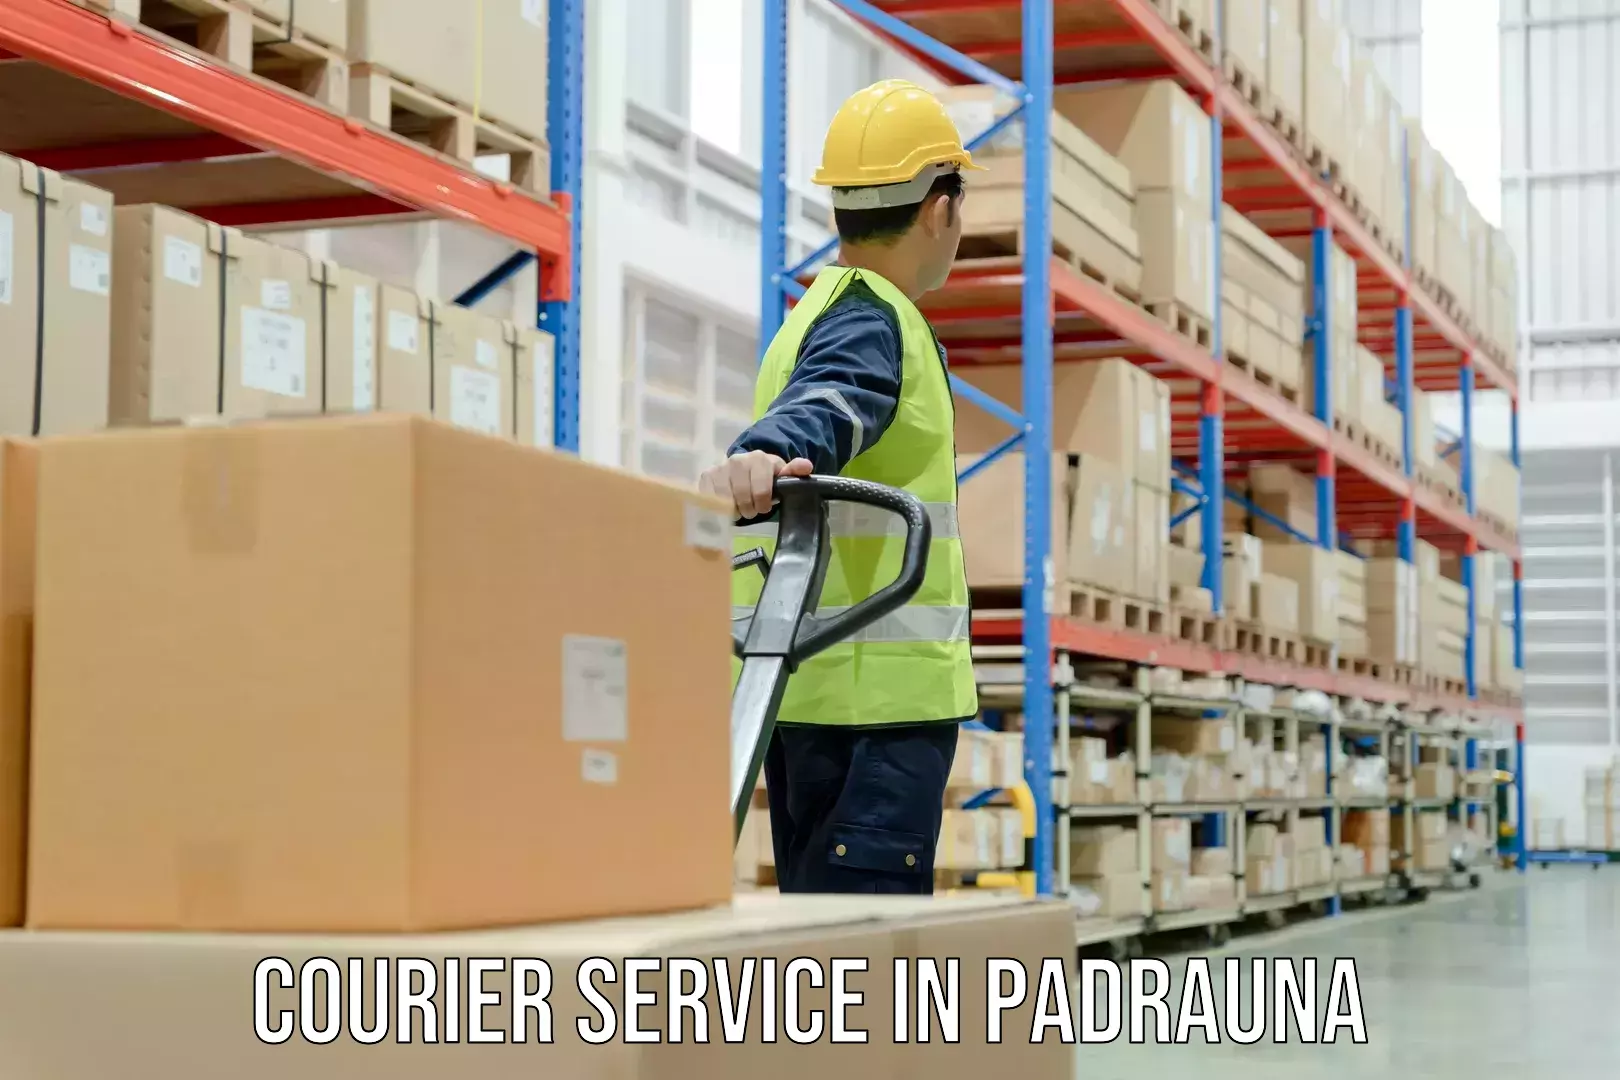 Express courier facilities in Padrauna